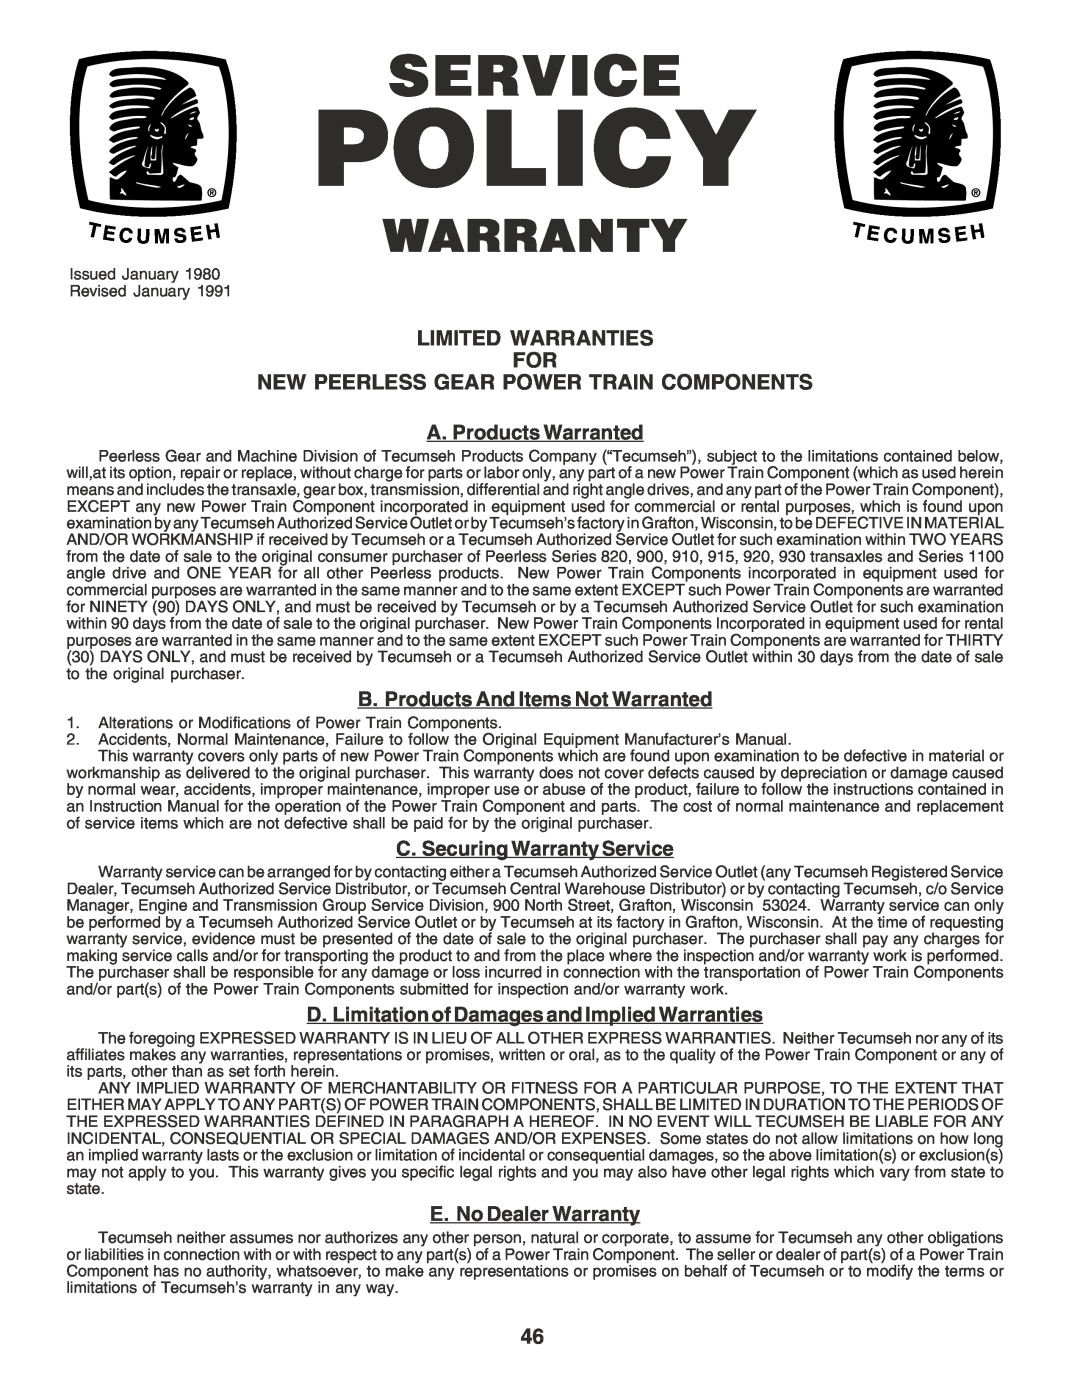 Poulan 183748 owner manual Limited Warranties For, New Peerless Gear Power Train Components, Policy 